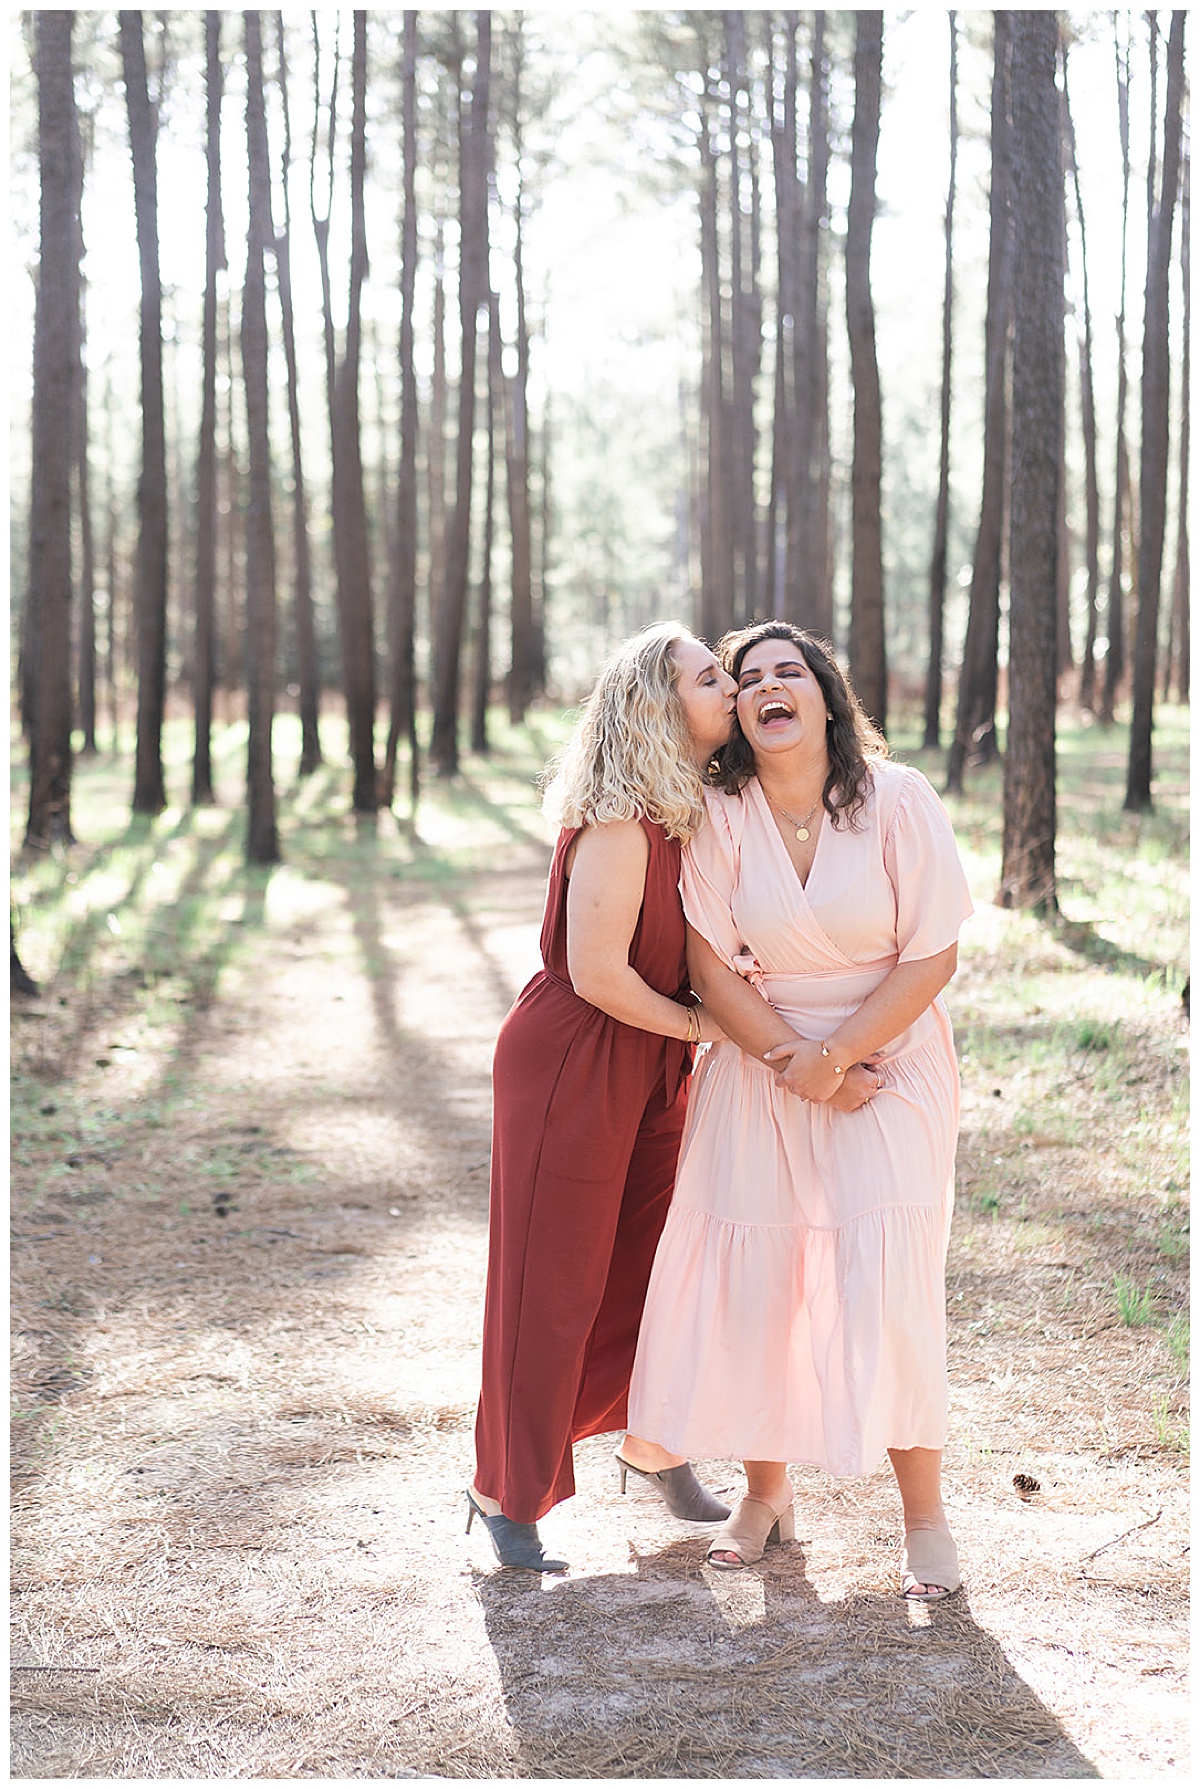 Women kiss one another for WG Jones Park Engagement Session 